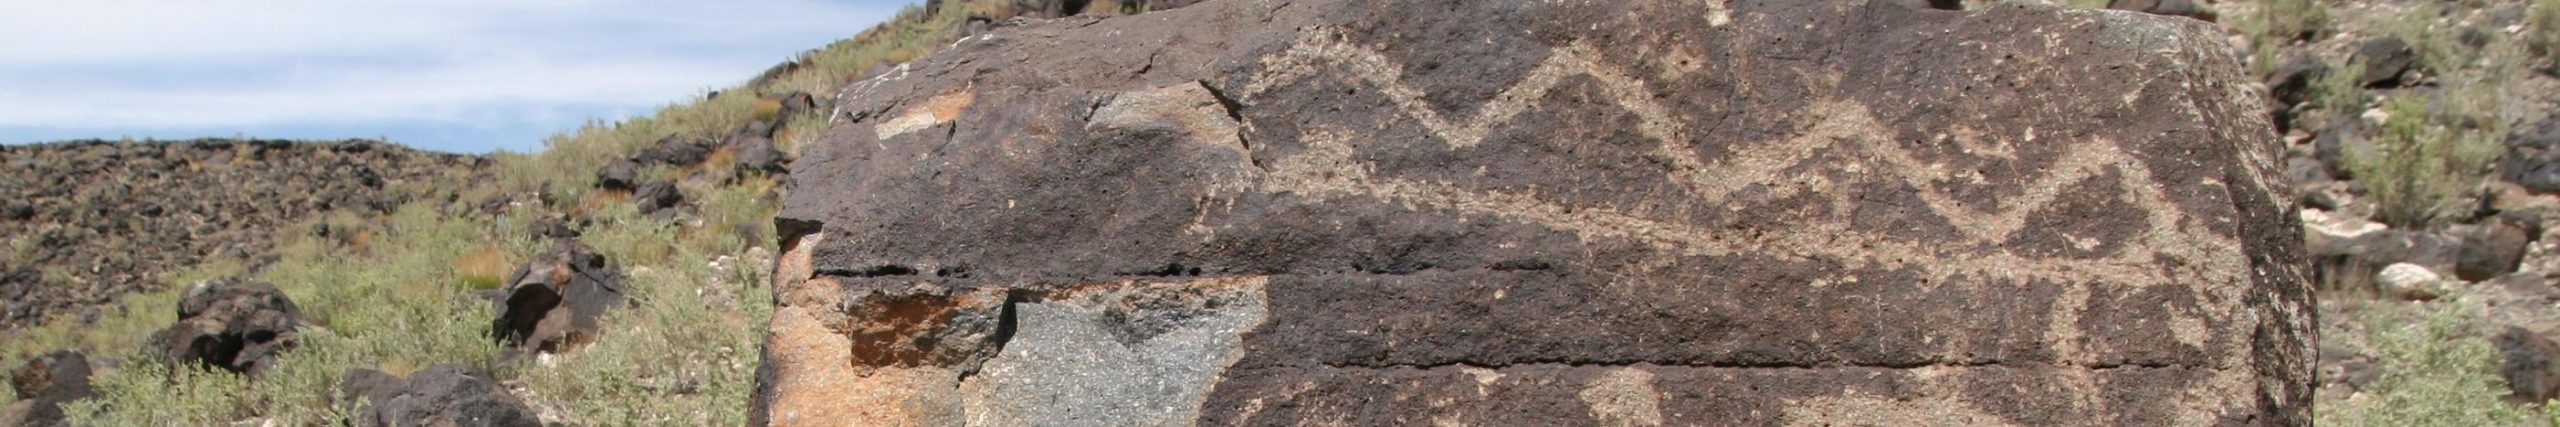 Citation Issued for Climbing Among Petroglyphs at Petroglyph National Monument, Man Tased